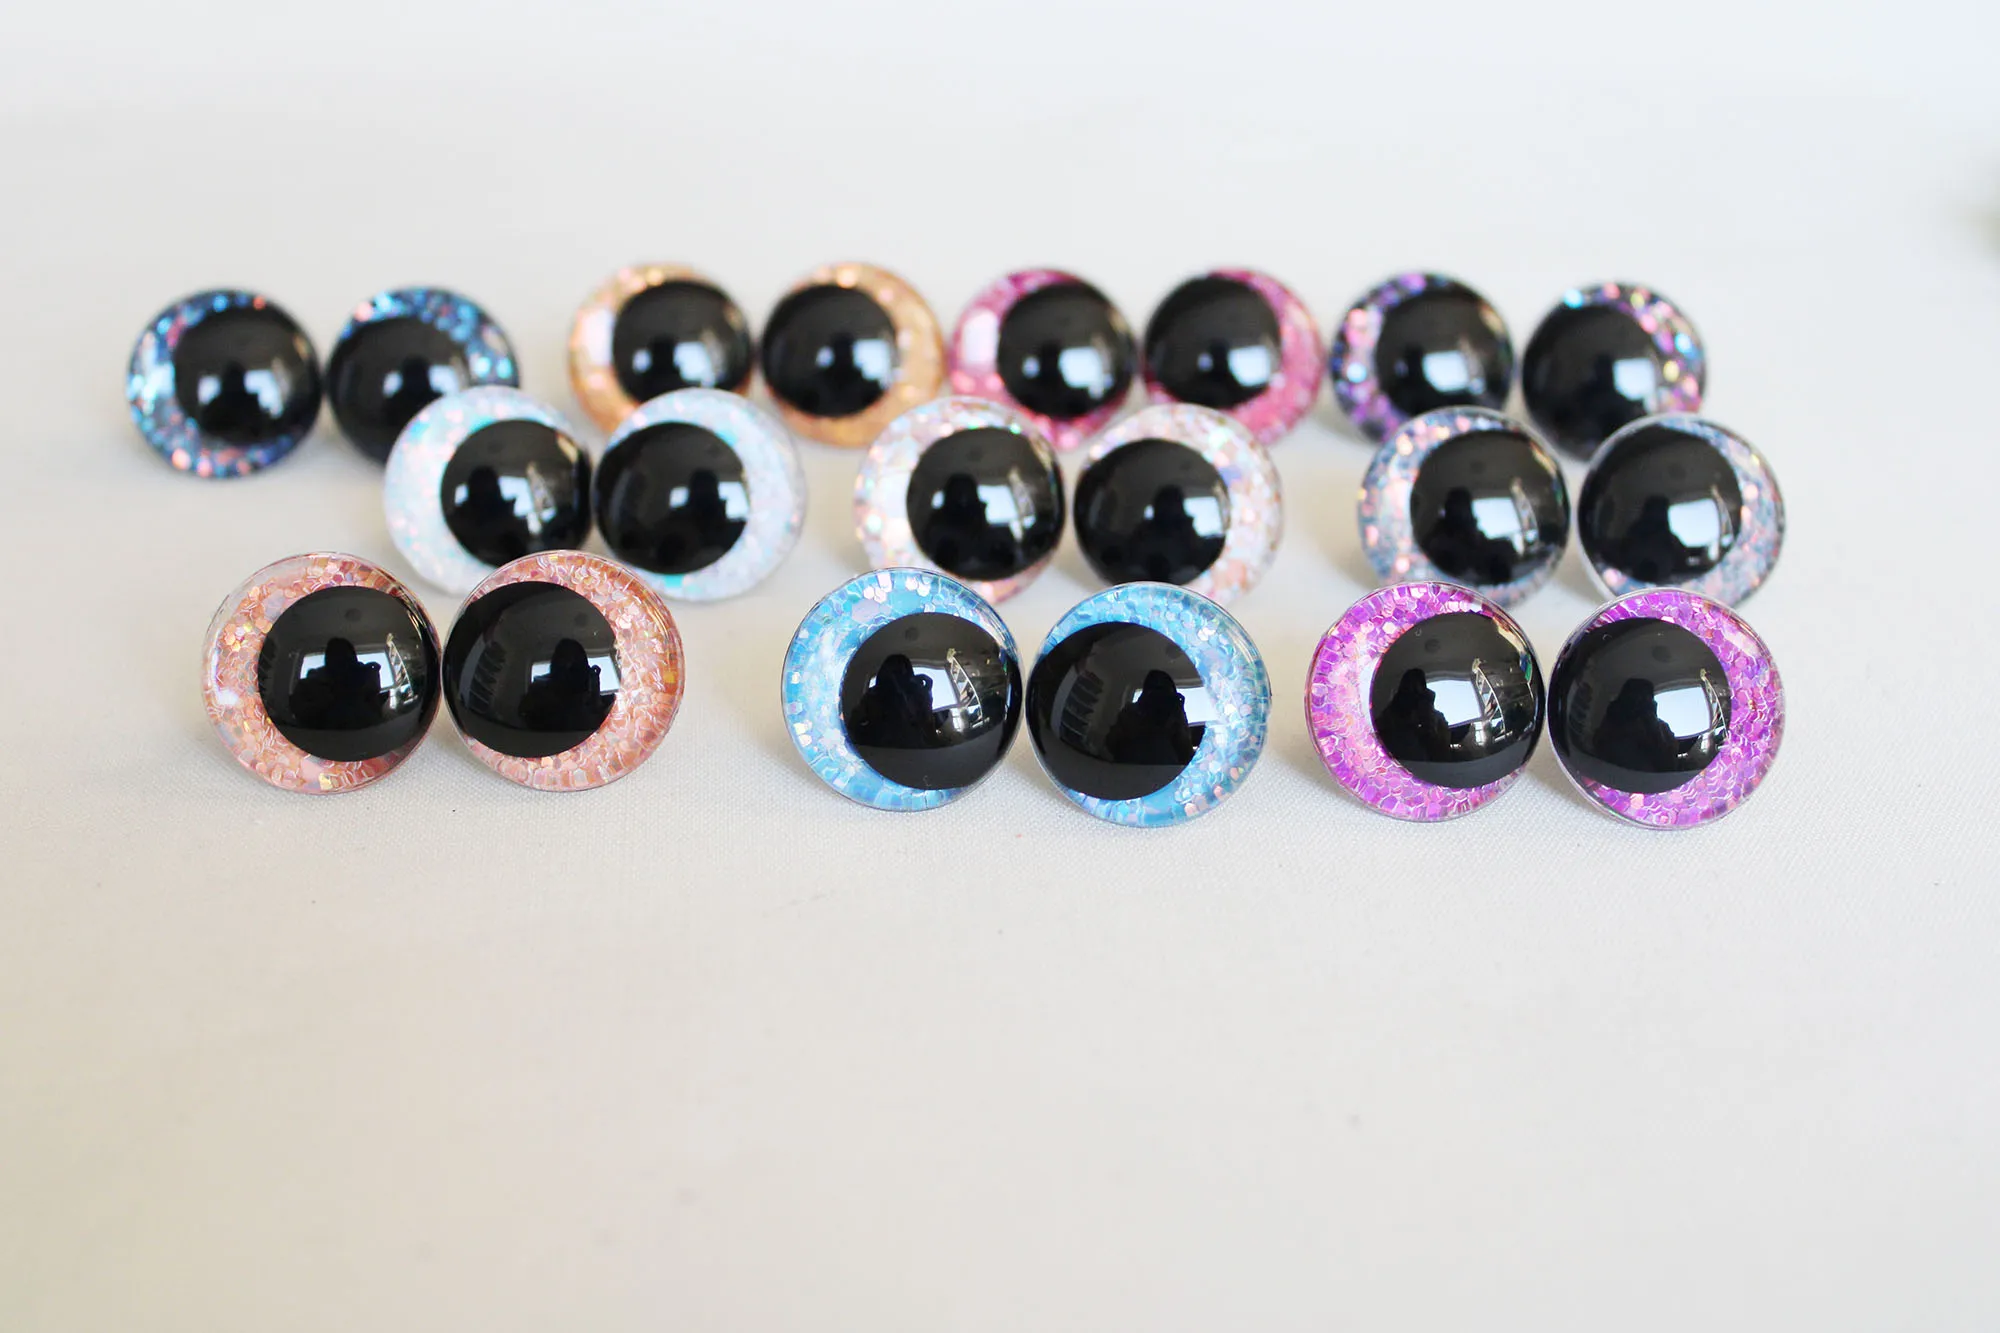 free shipping!!! 100pcs x 5-18mm clear round safety eyes can